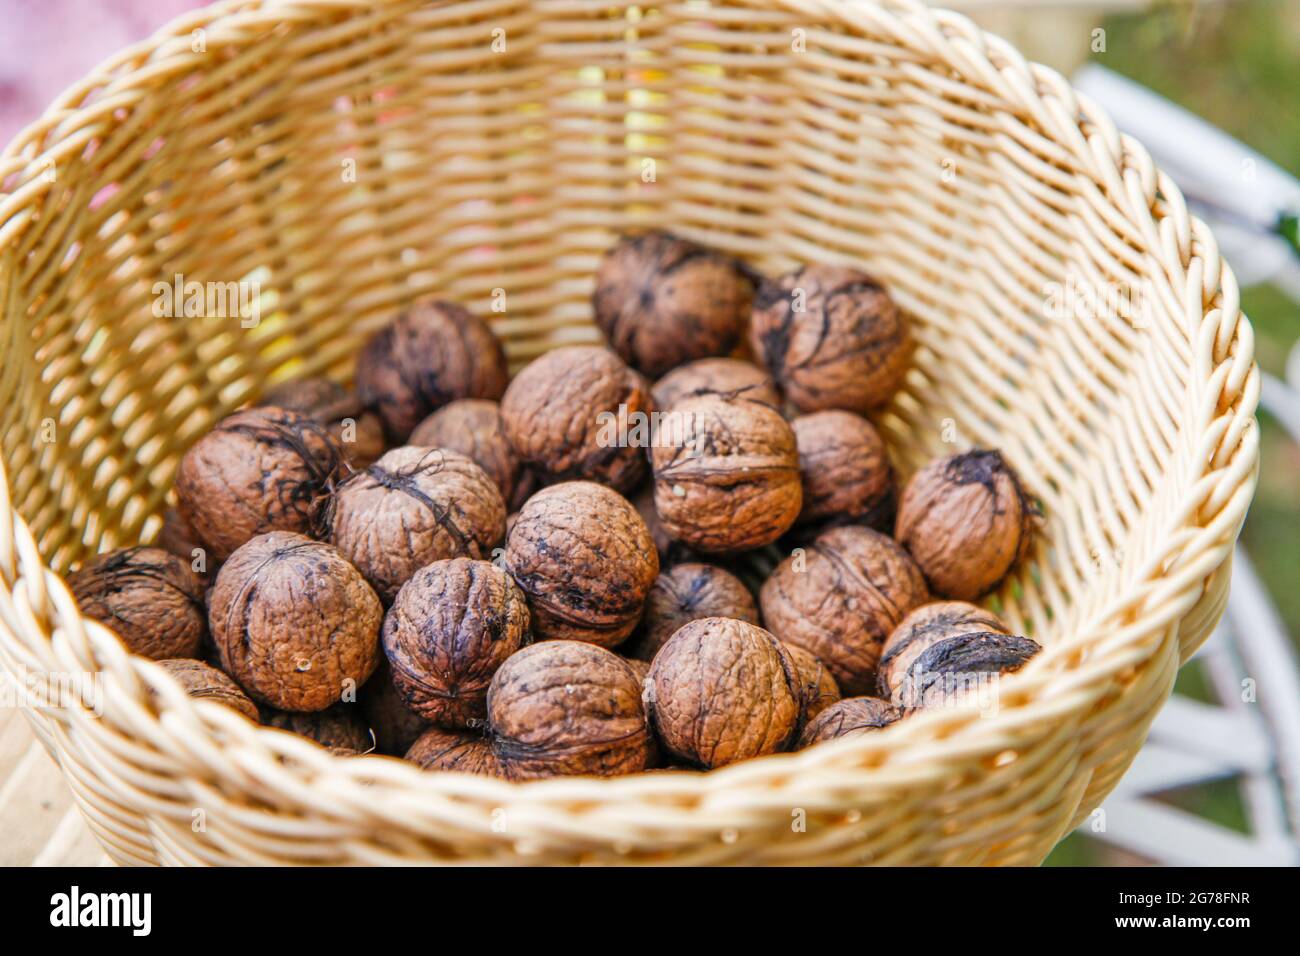 Walnuts in a basket in the garden, Stock Photo